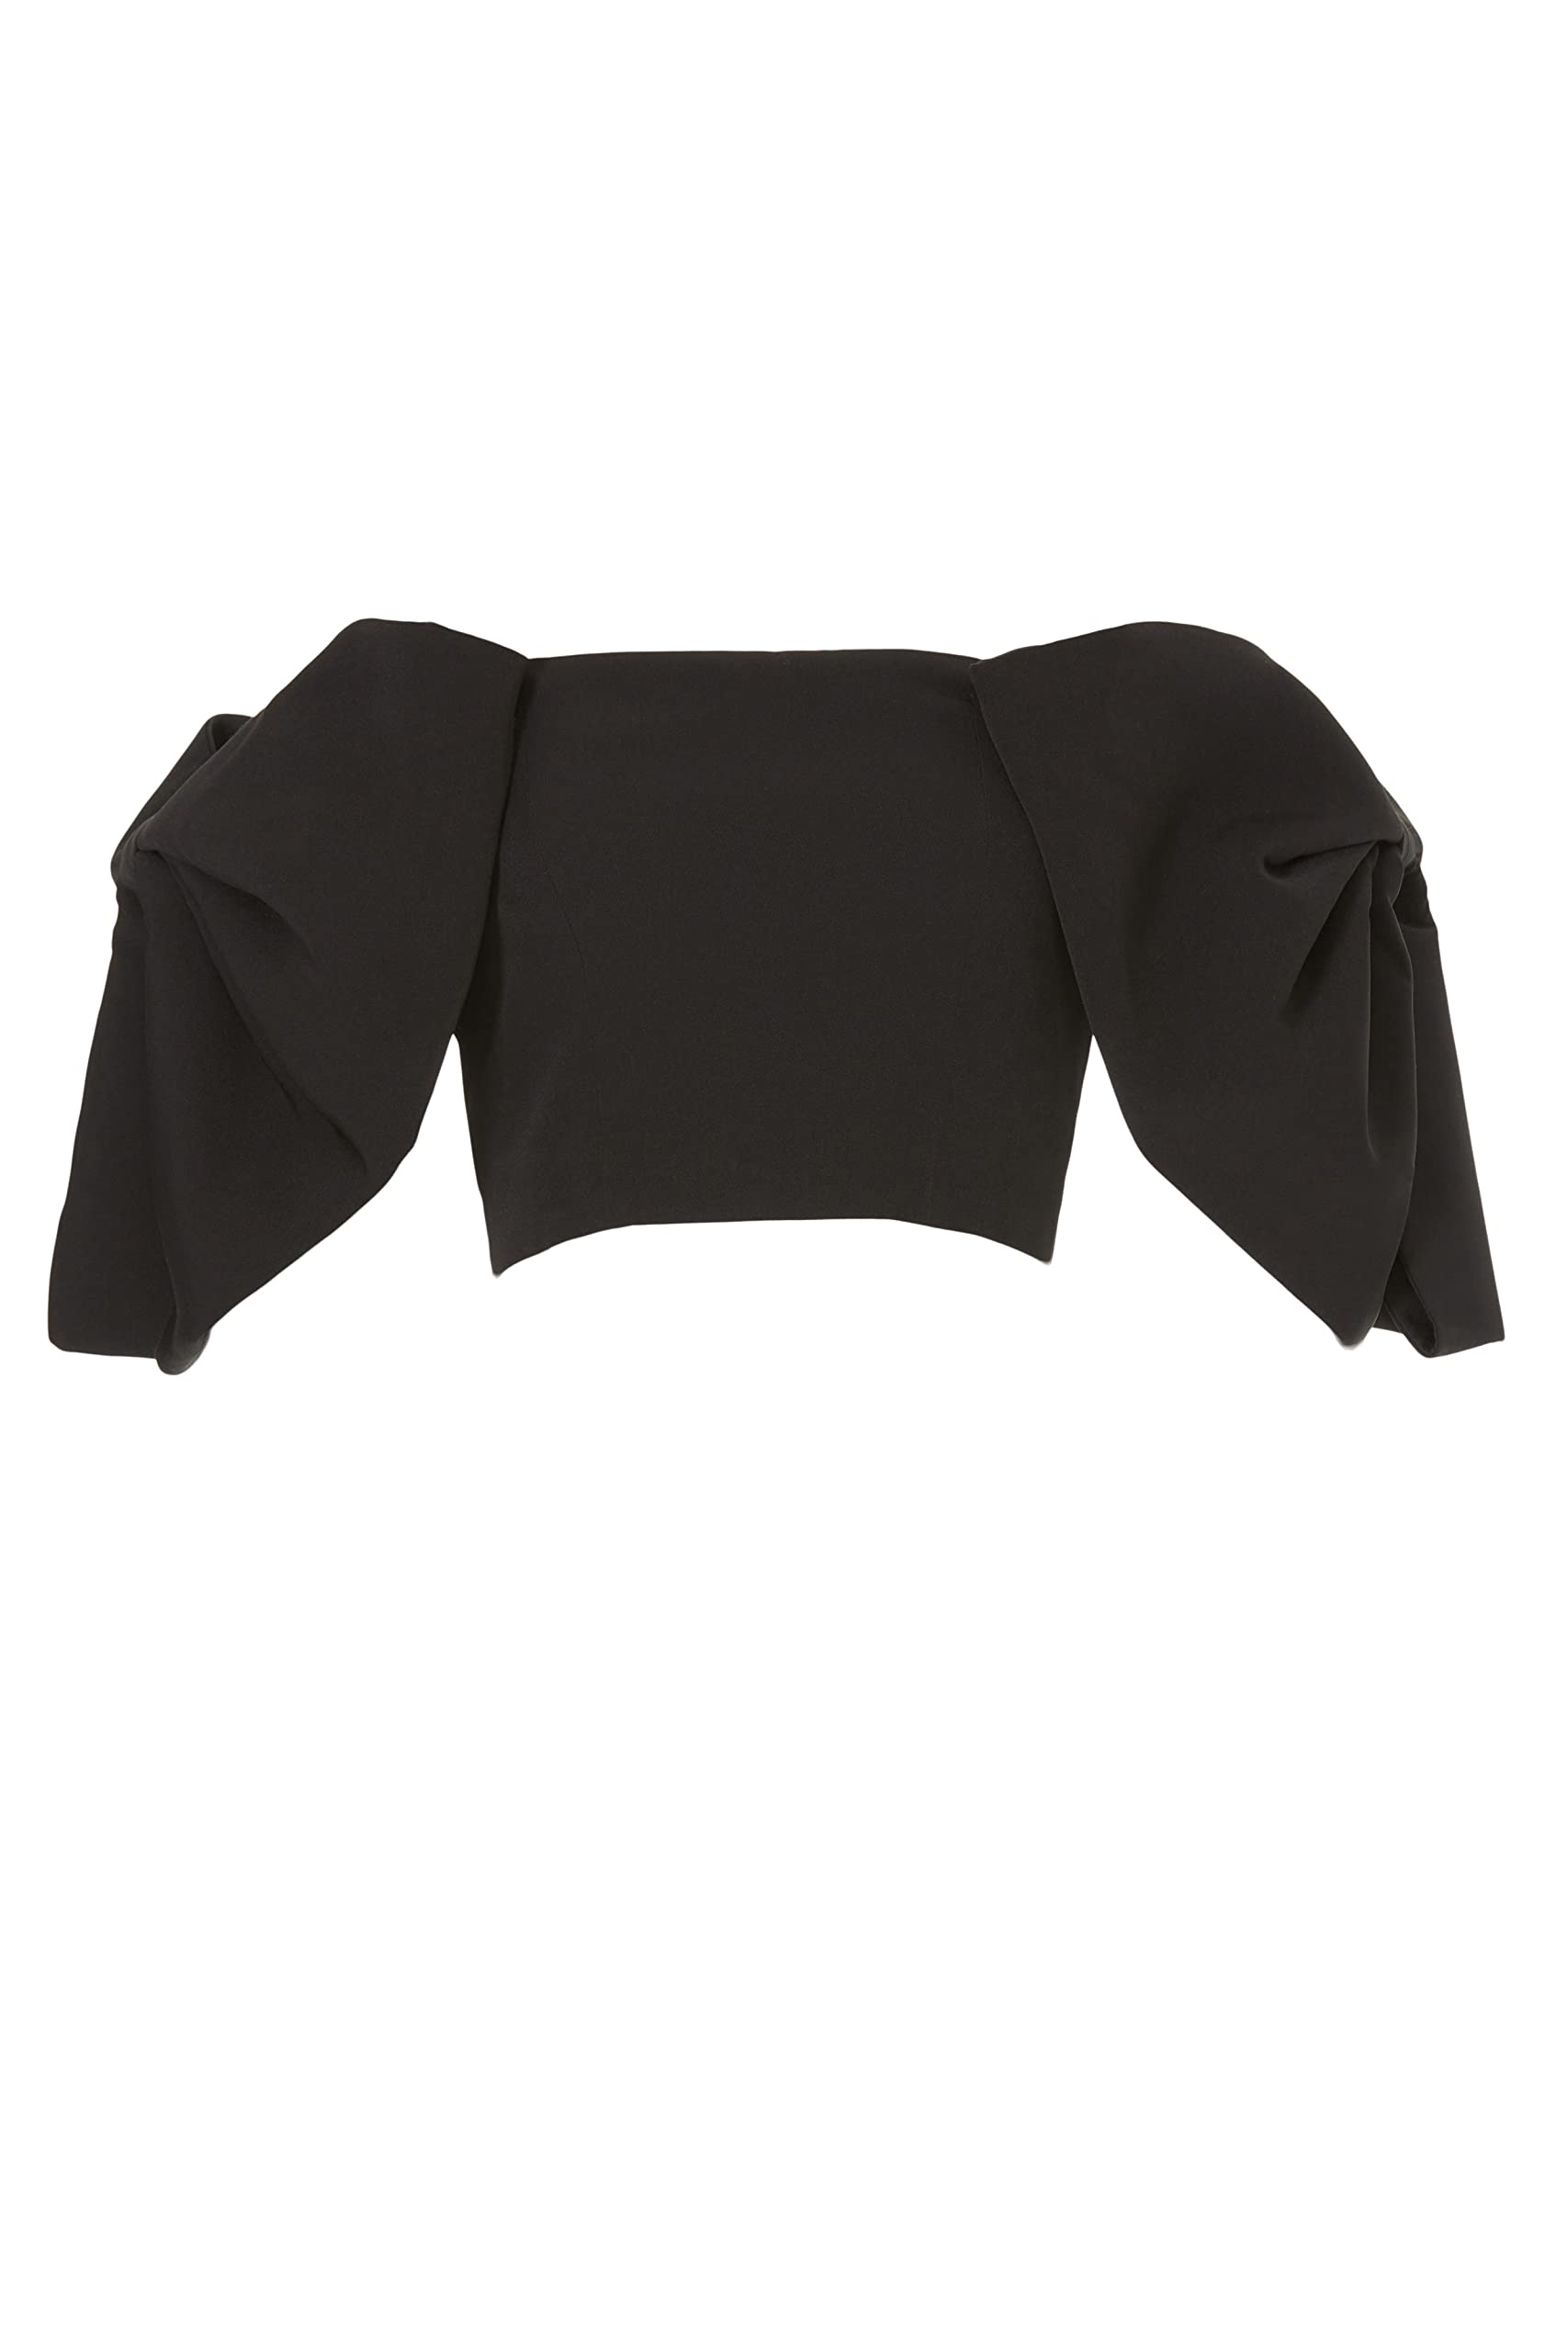 TOCCIN X RTR RTR Design Collective Bow Sleeve Crop Top